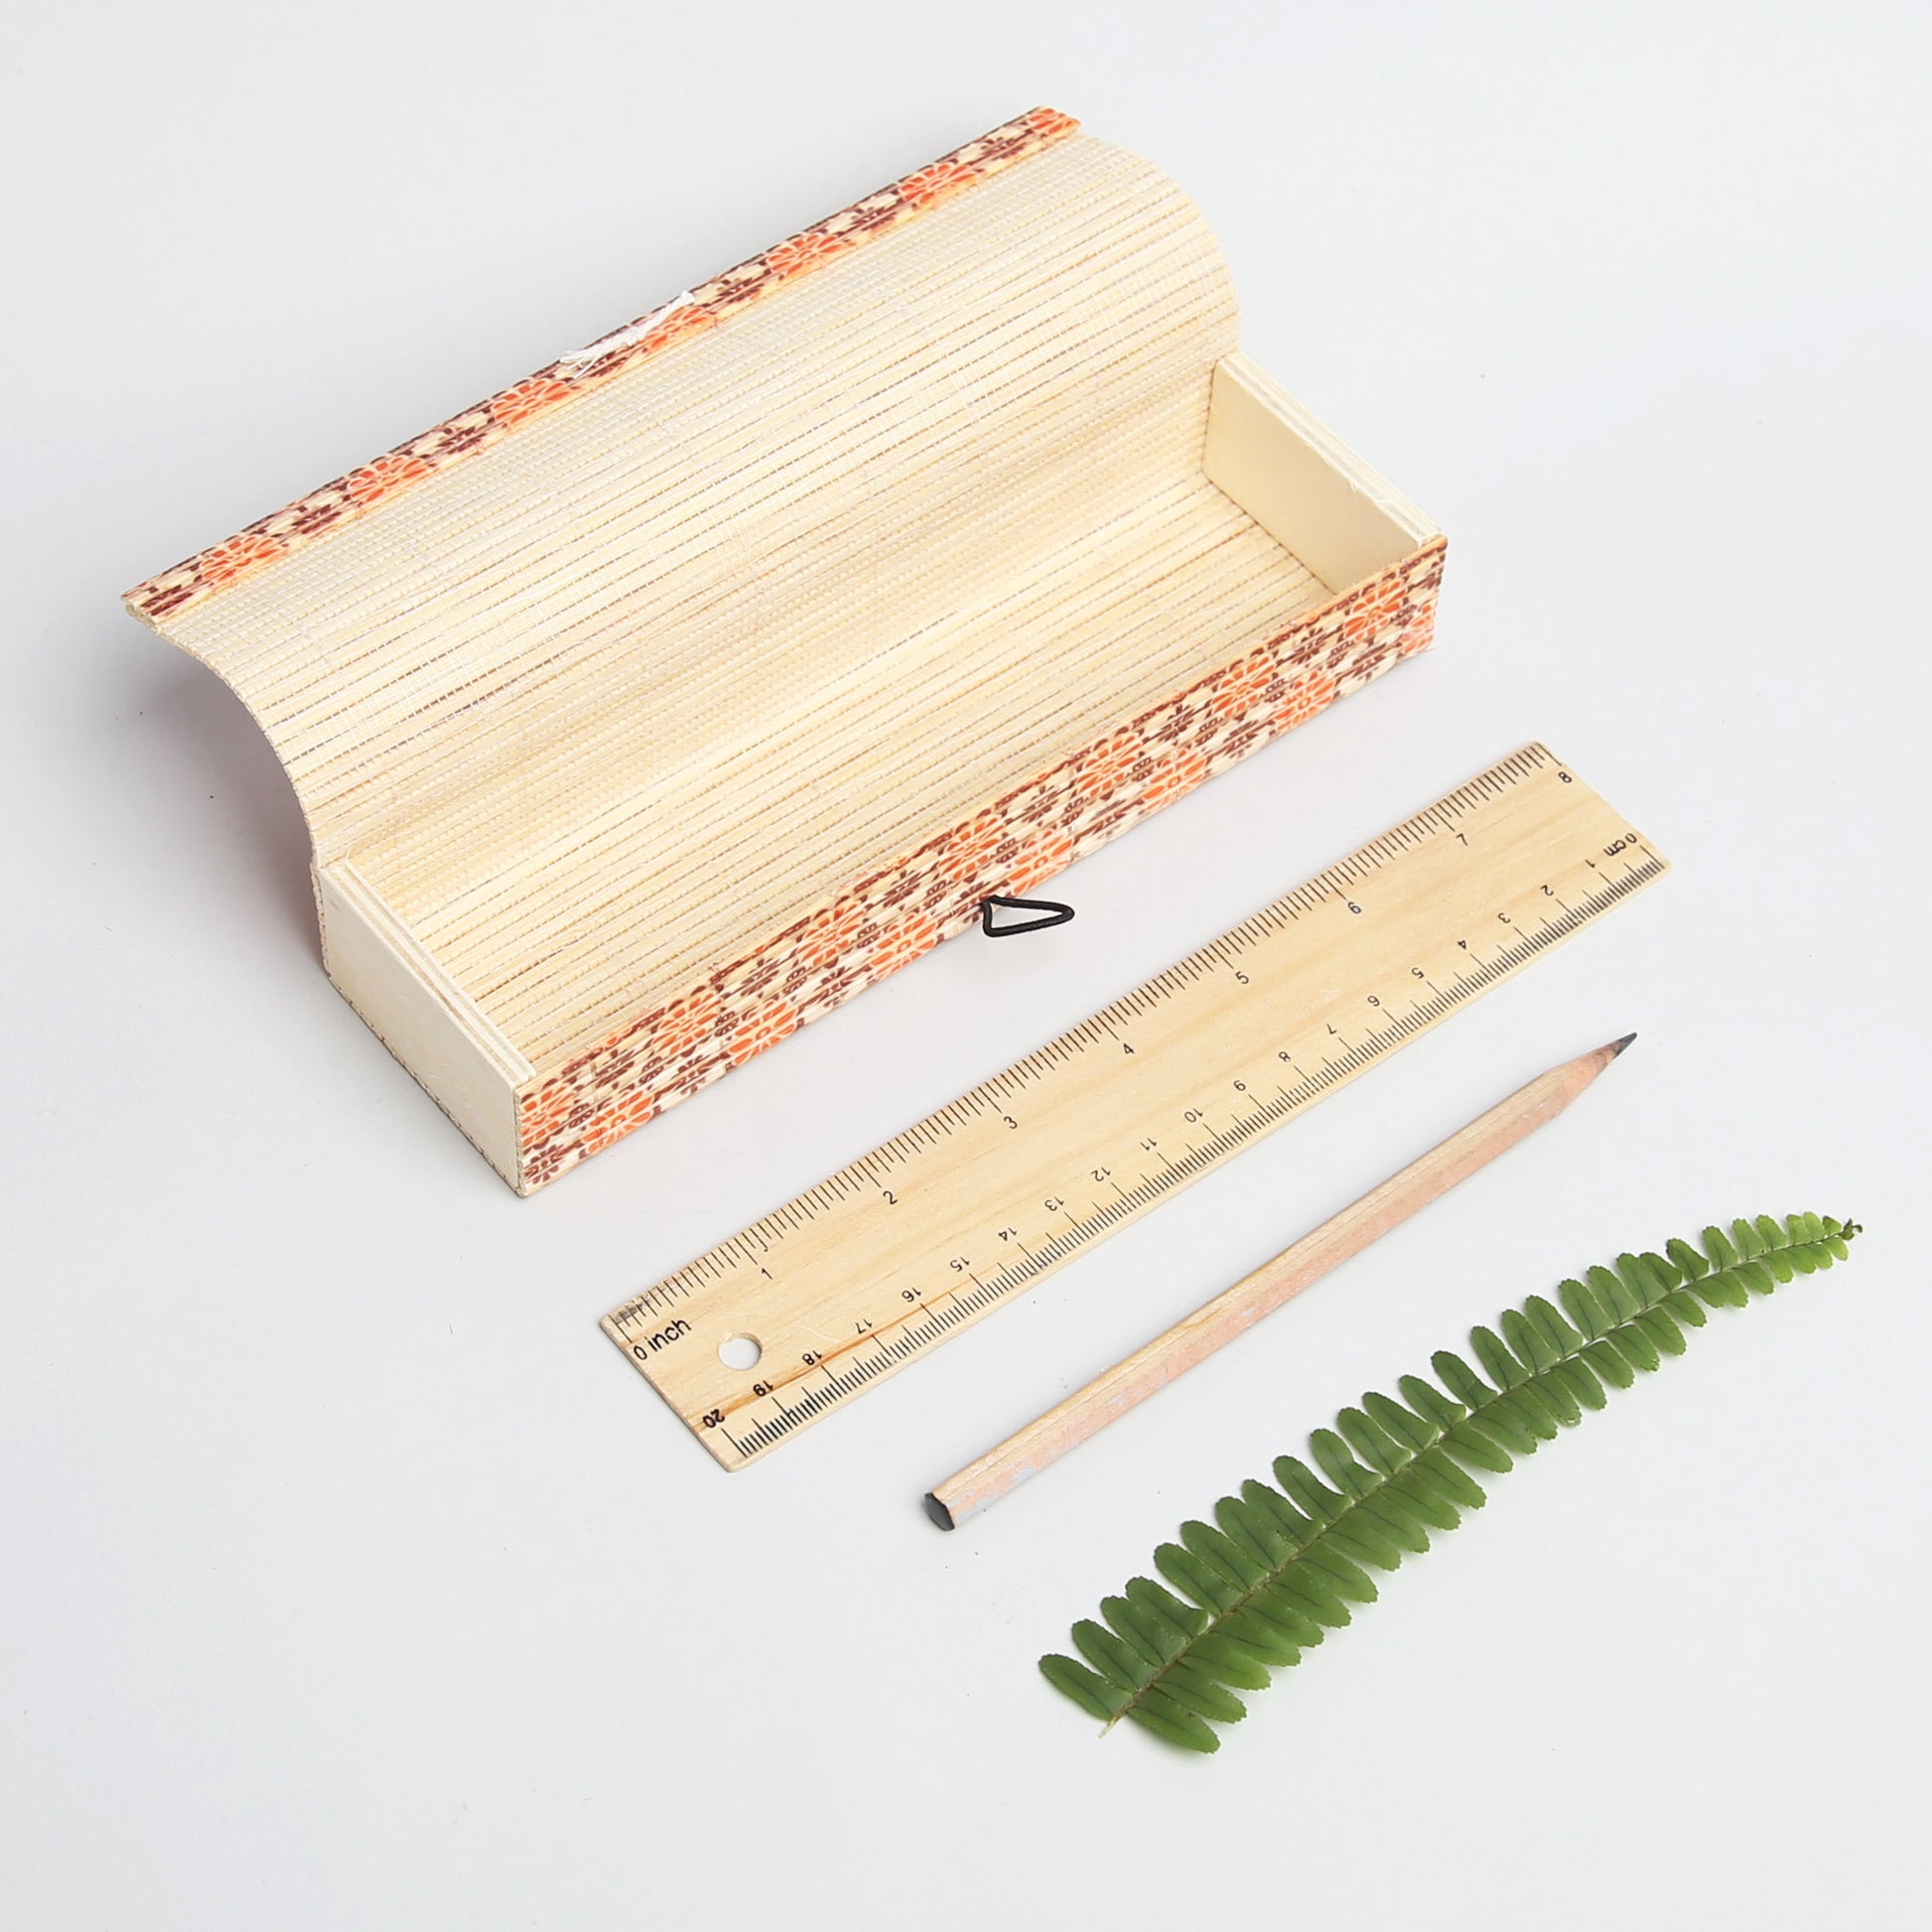 DAISYLIFE Bamboo Long Box for Storage, Utility & Gifts - Set of 2